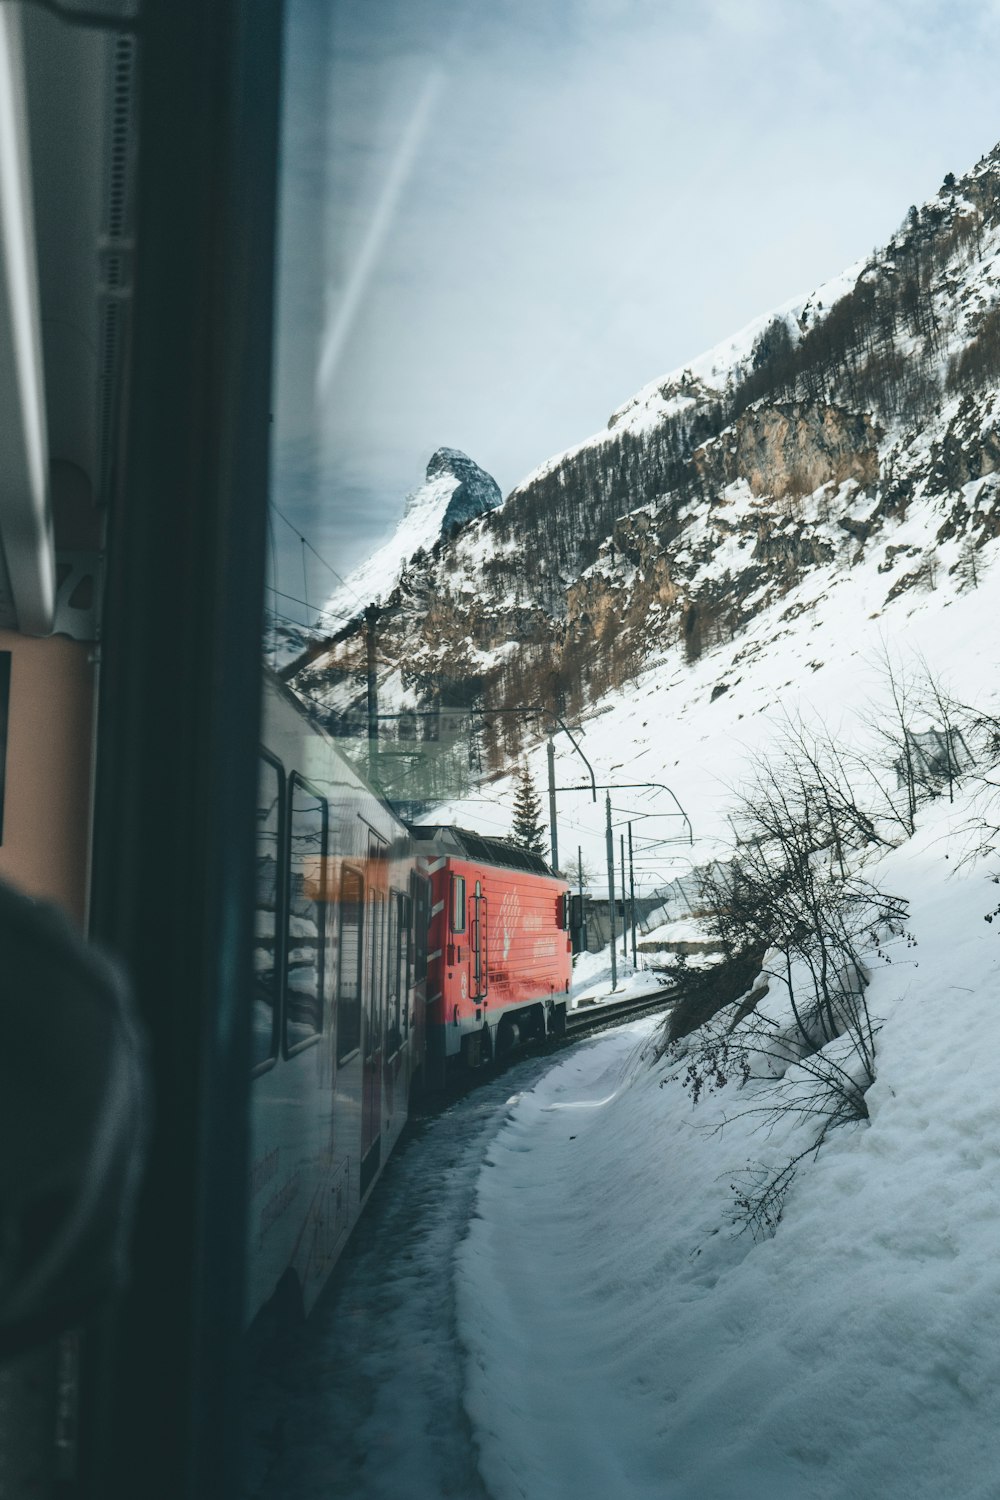 red train on rail tracks near snow covered mountain during daytime